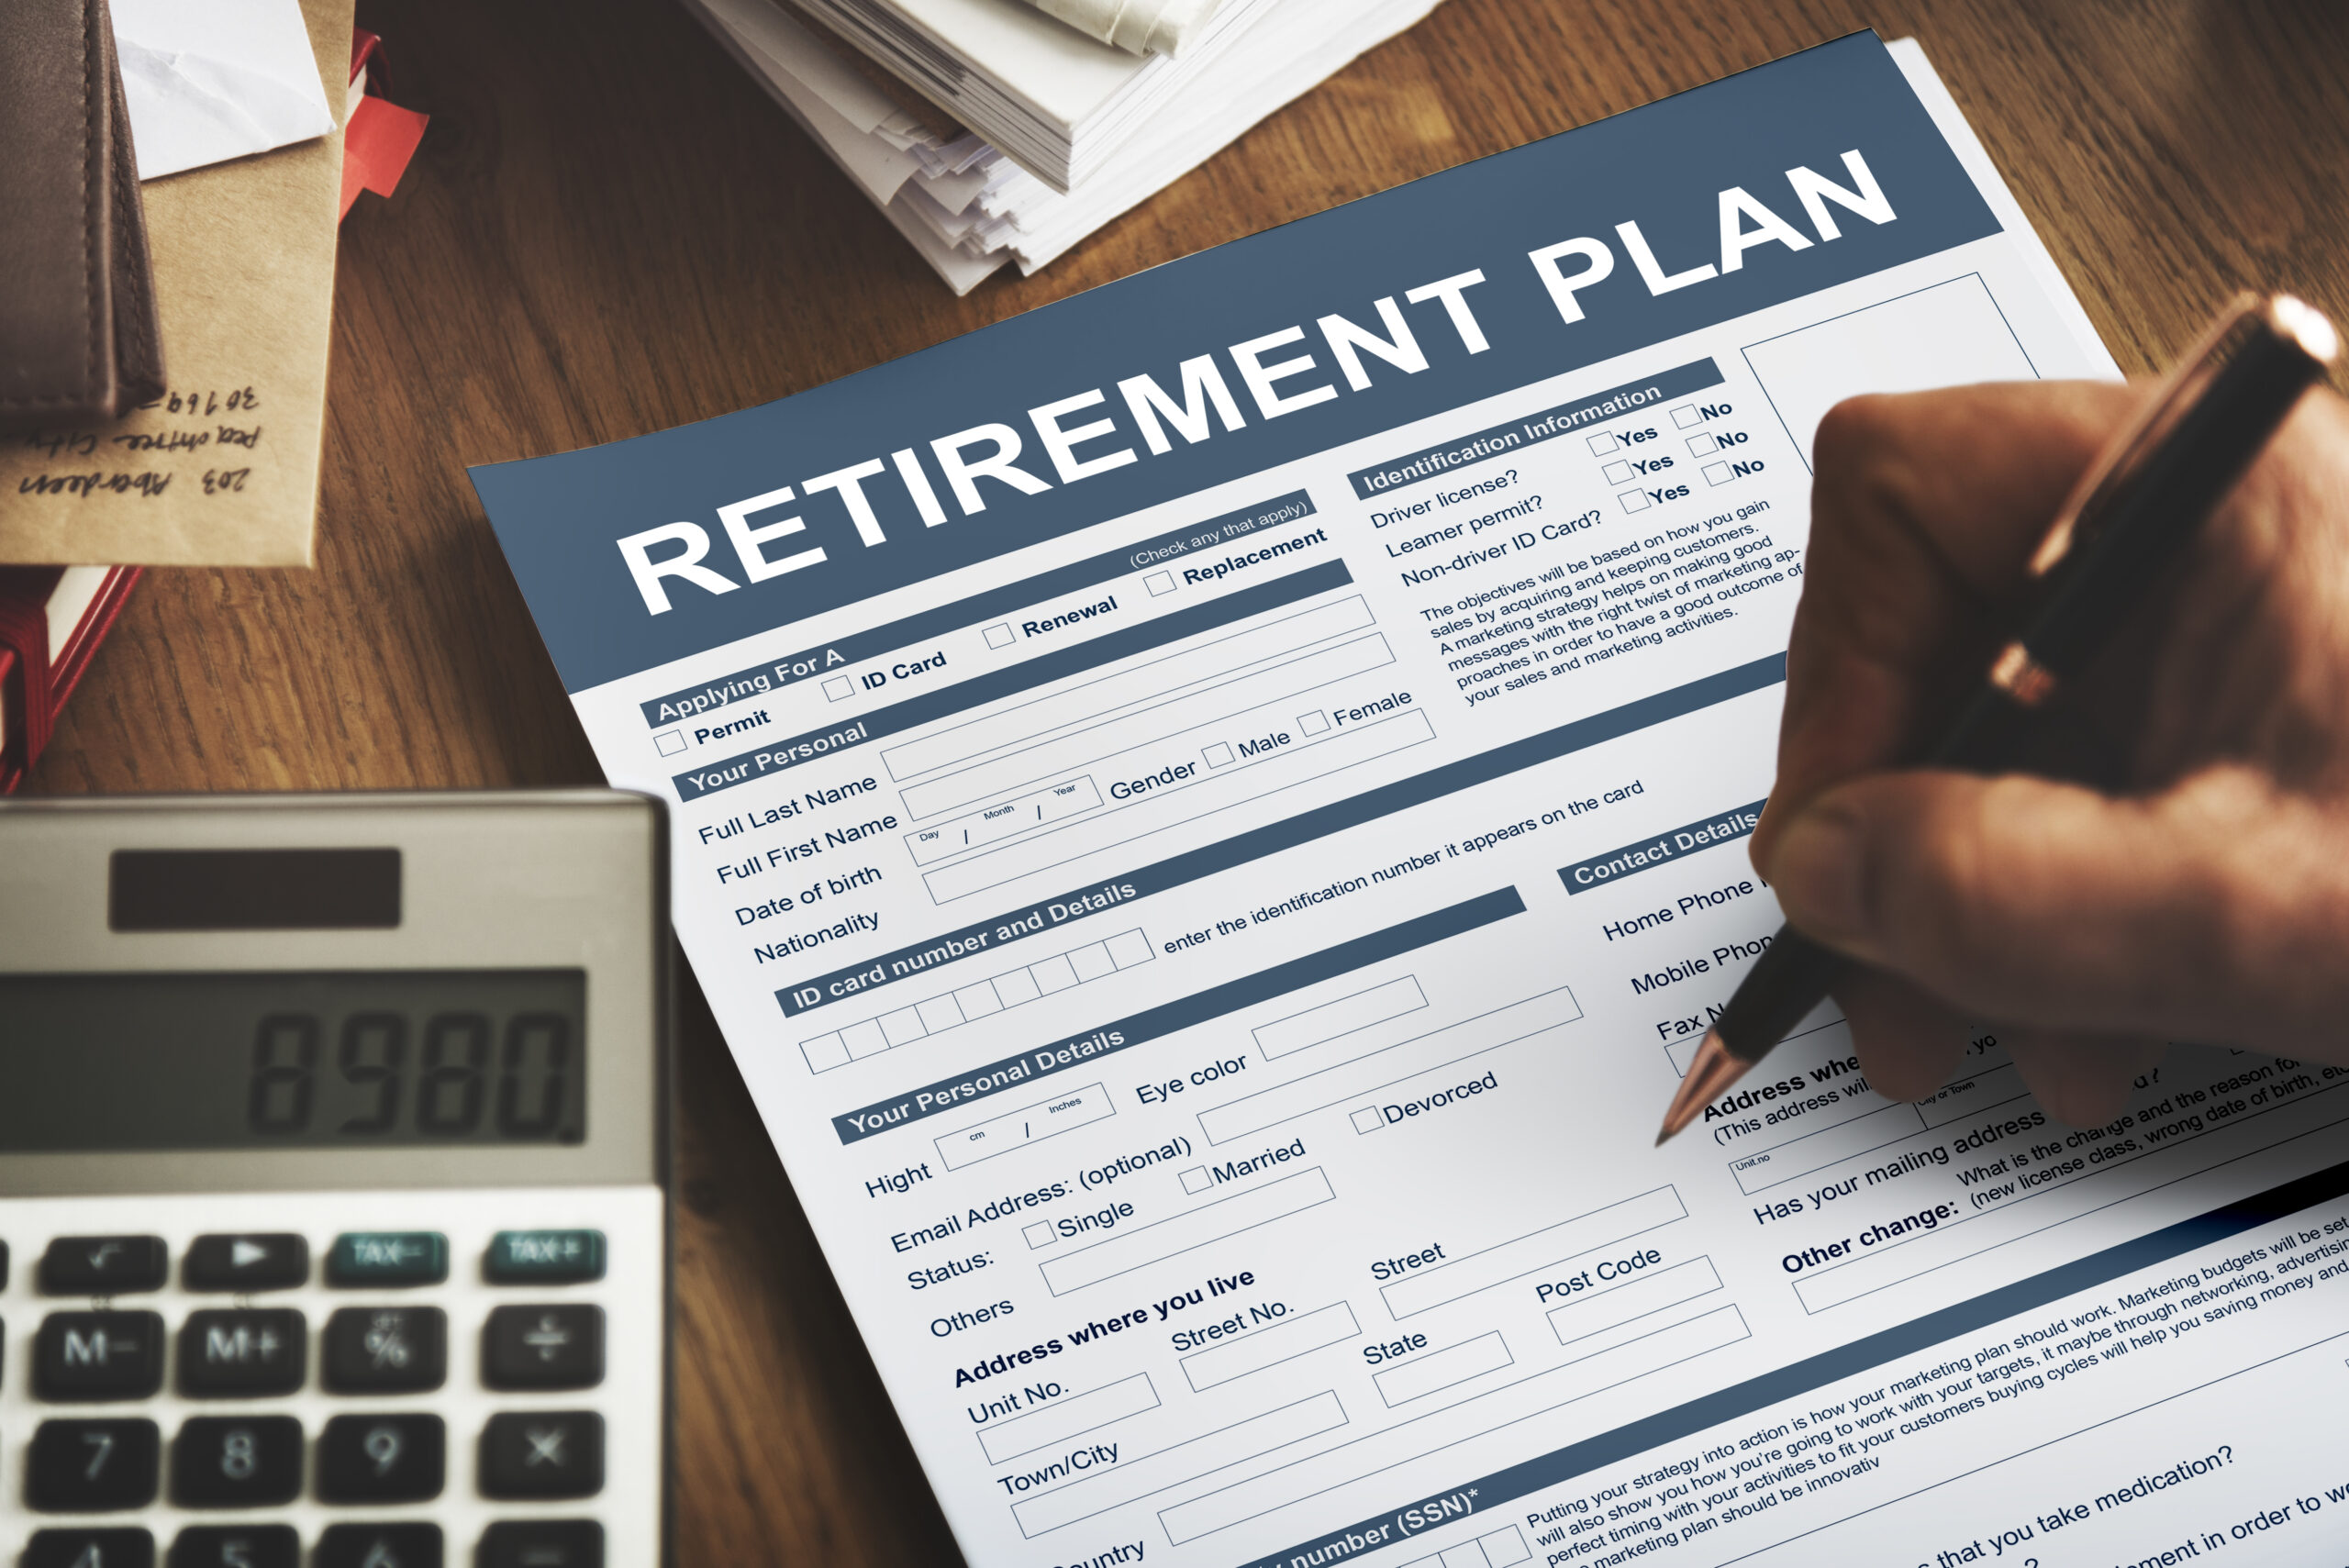 What to consider before retiring